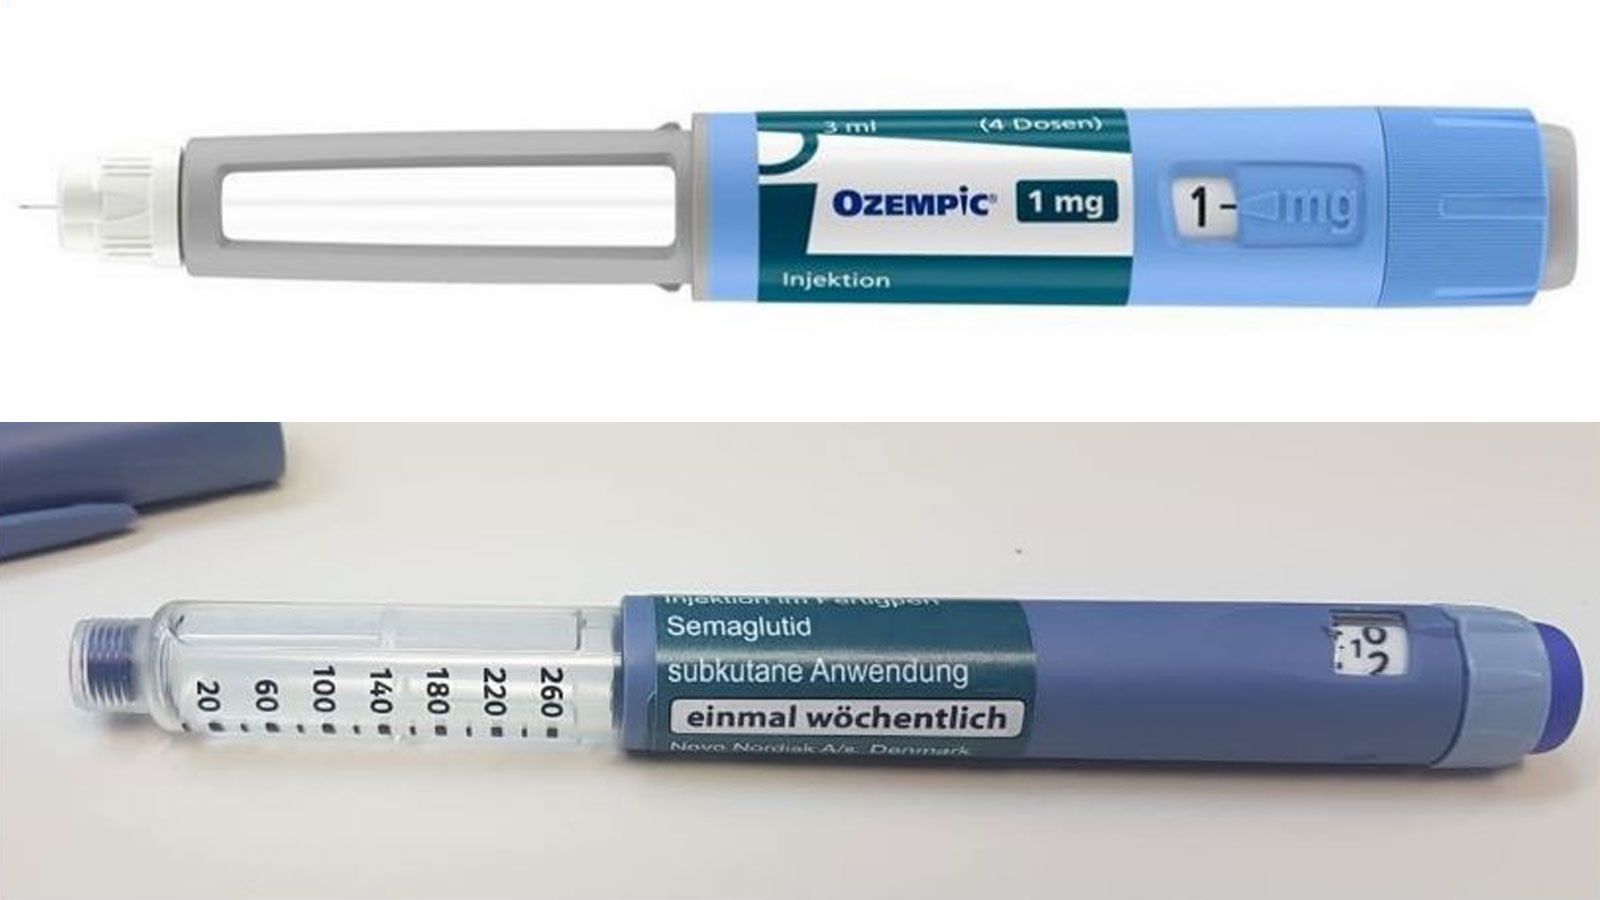 How do I know when my Ozempic pen is empty? - NiceRx